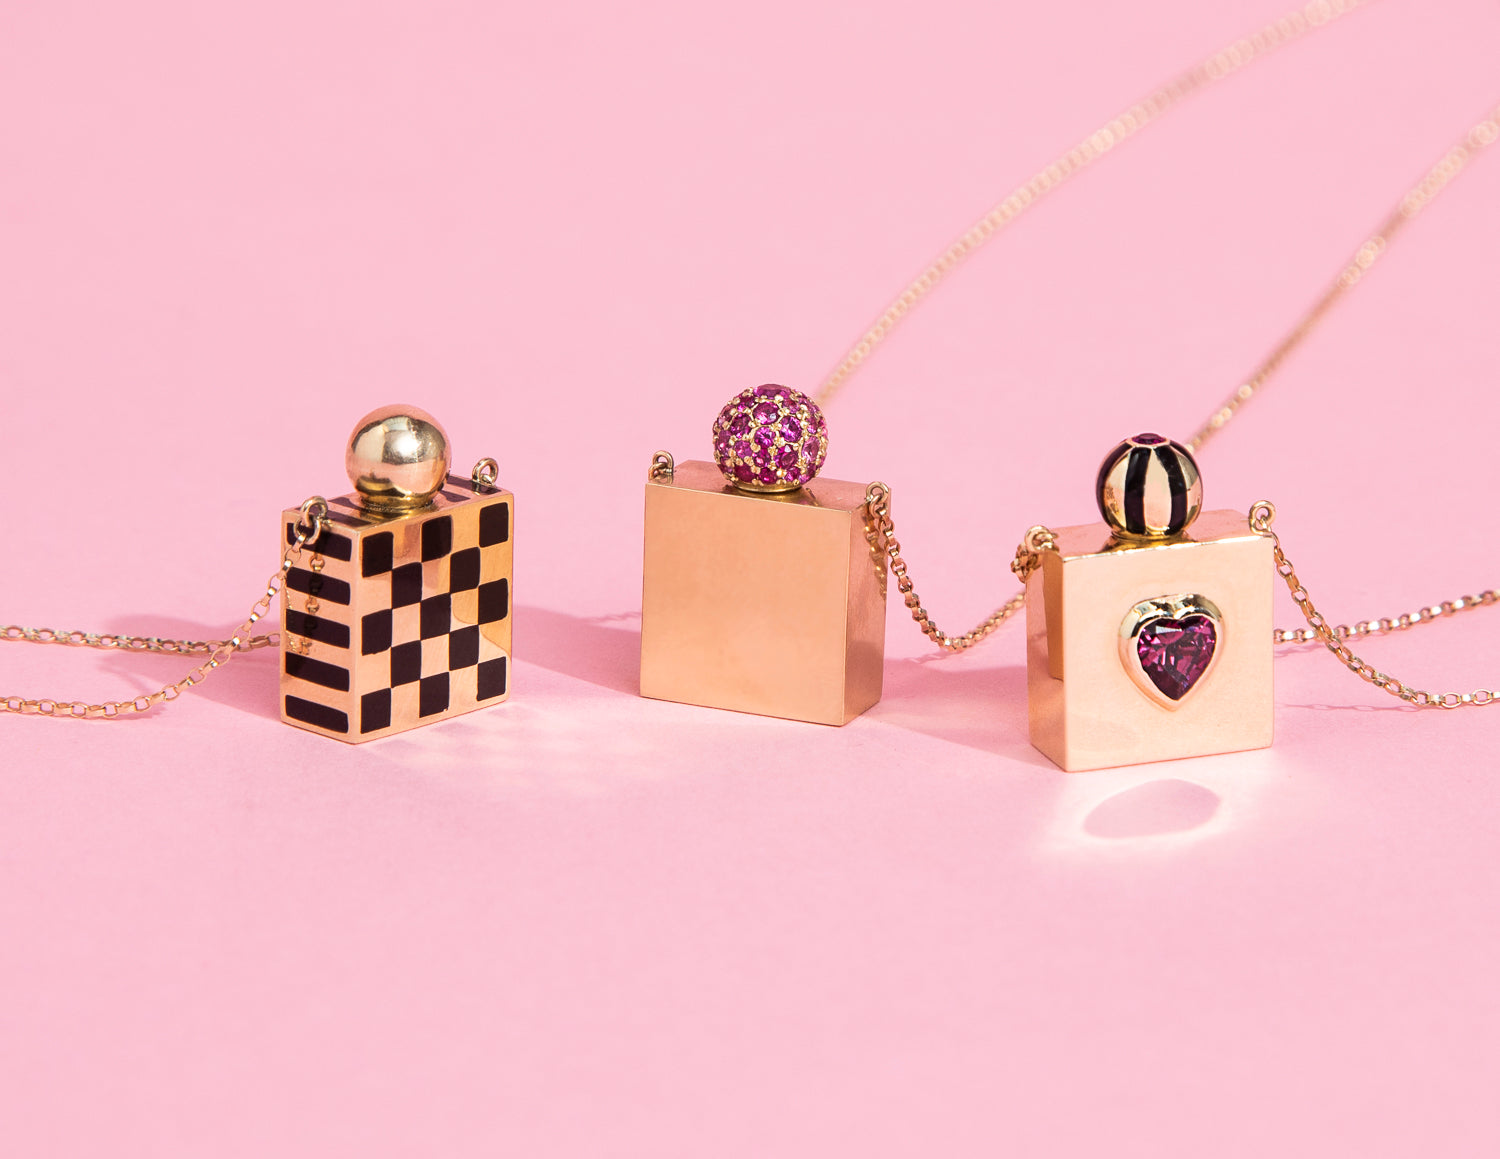 Rachel Quinn Jewelry 3 Square Vessel Box Necklaces in yellow gold variations on a pink background.